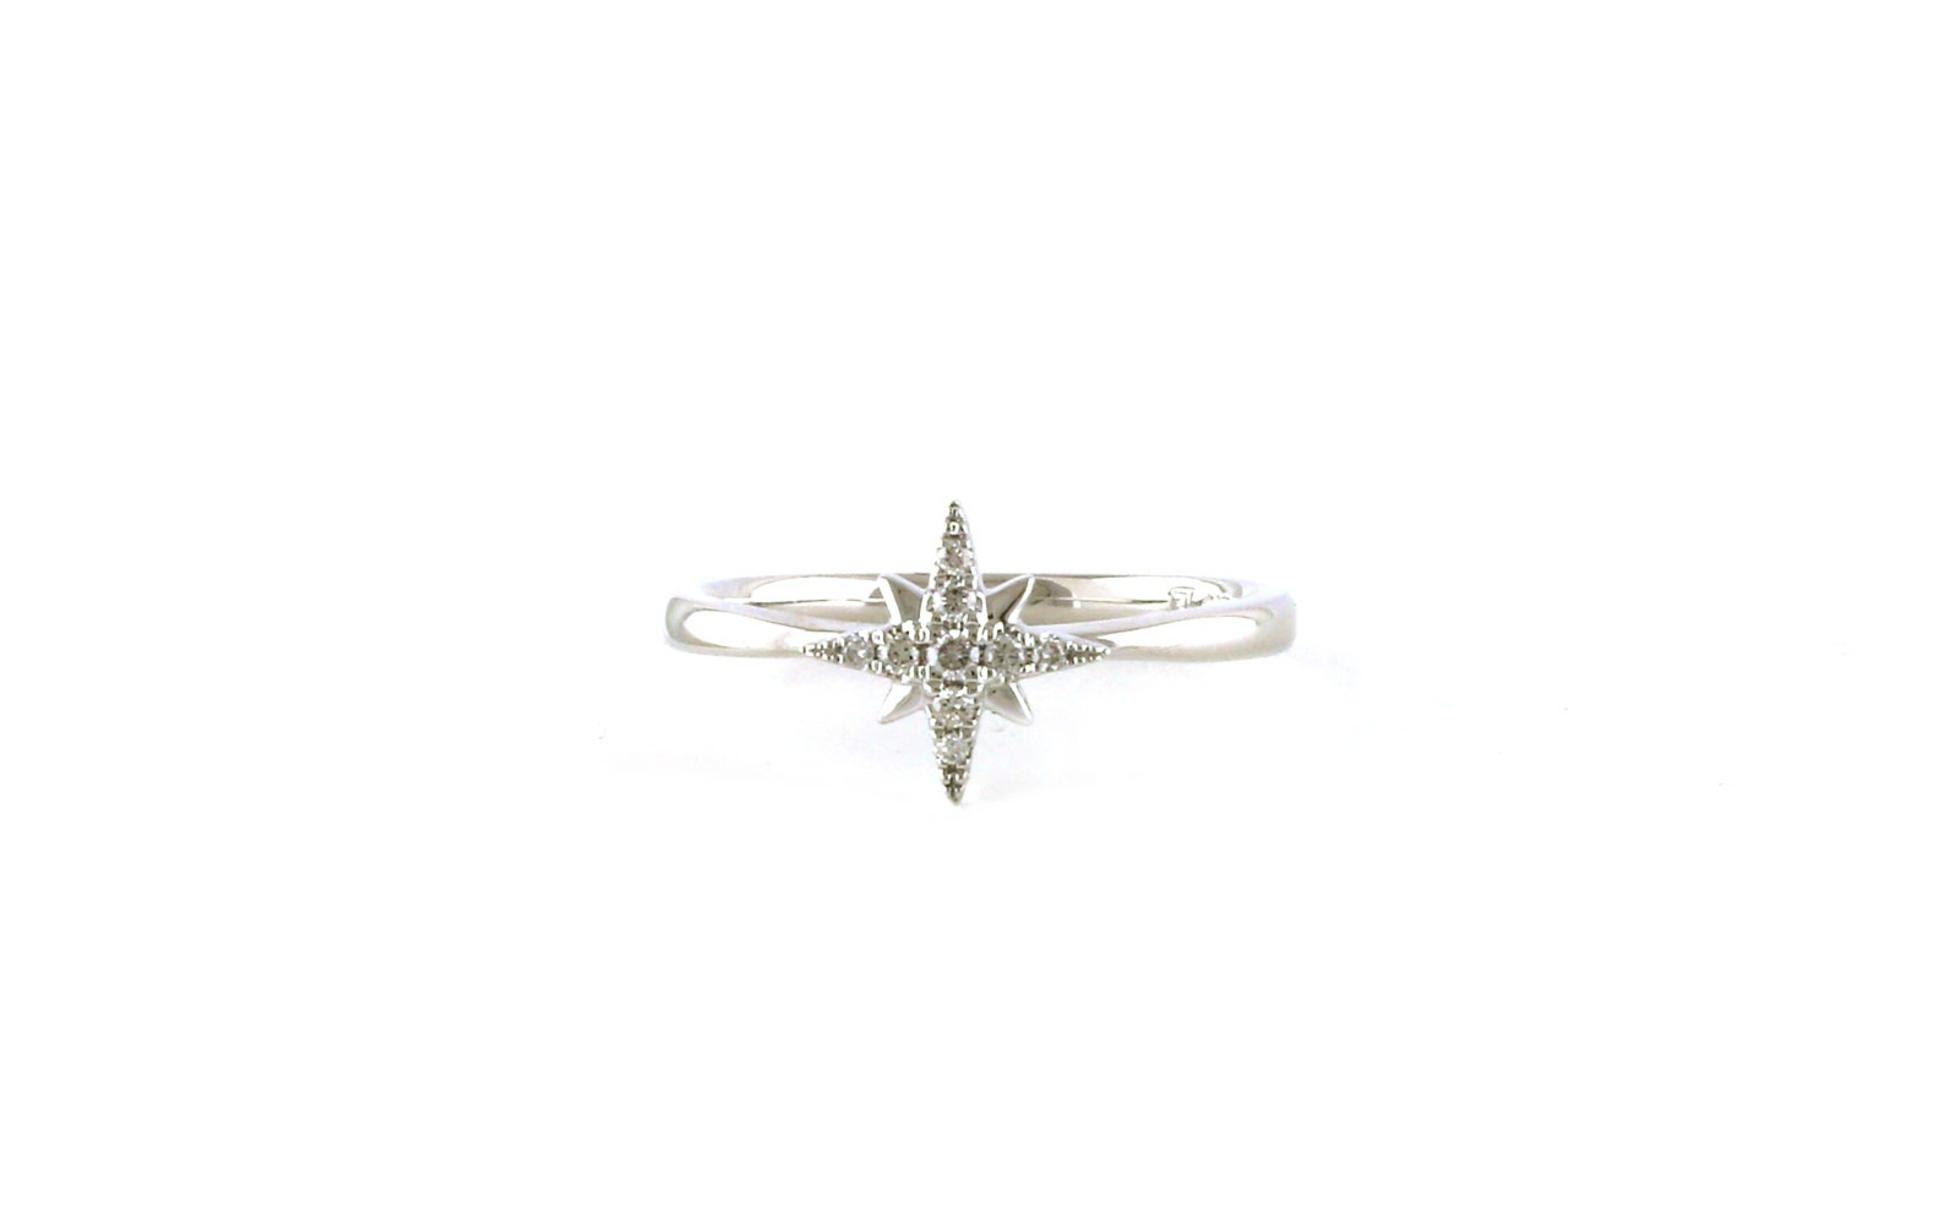 North Star Diamond Ring in White Gold (0.08cts TWT)